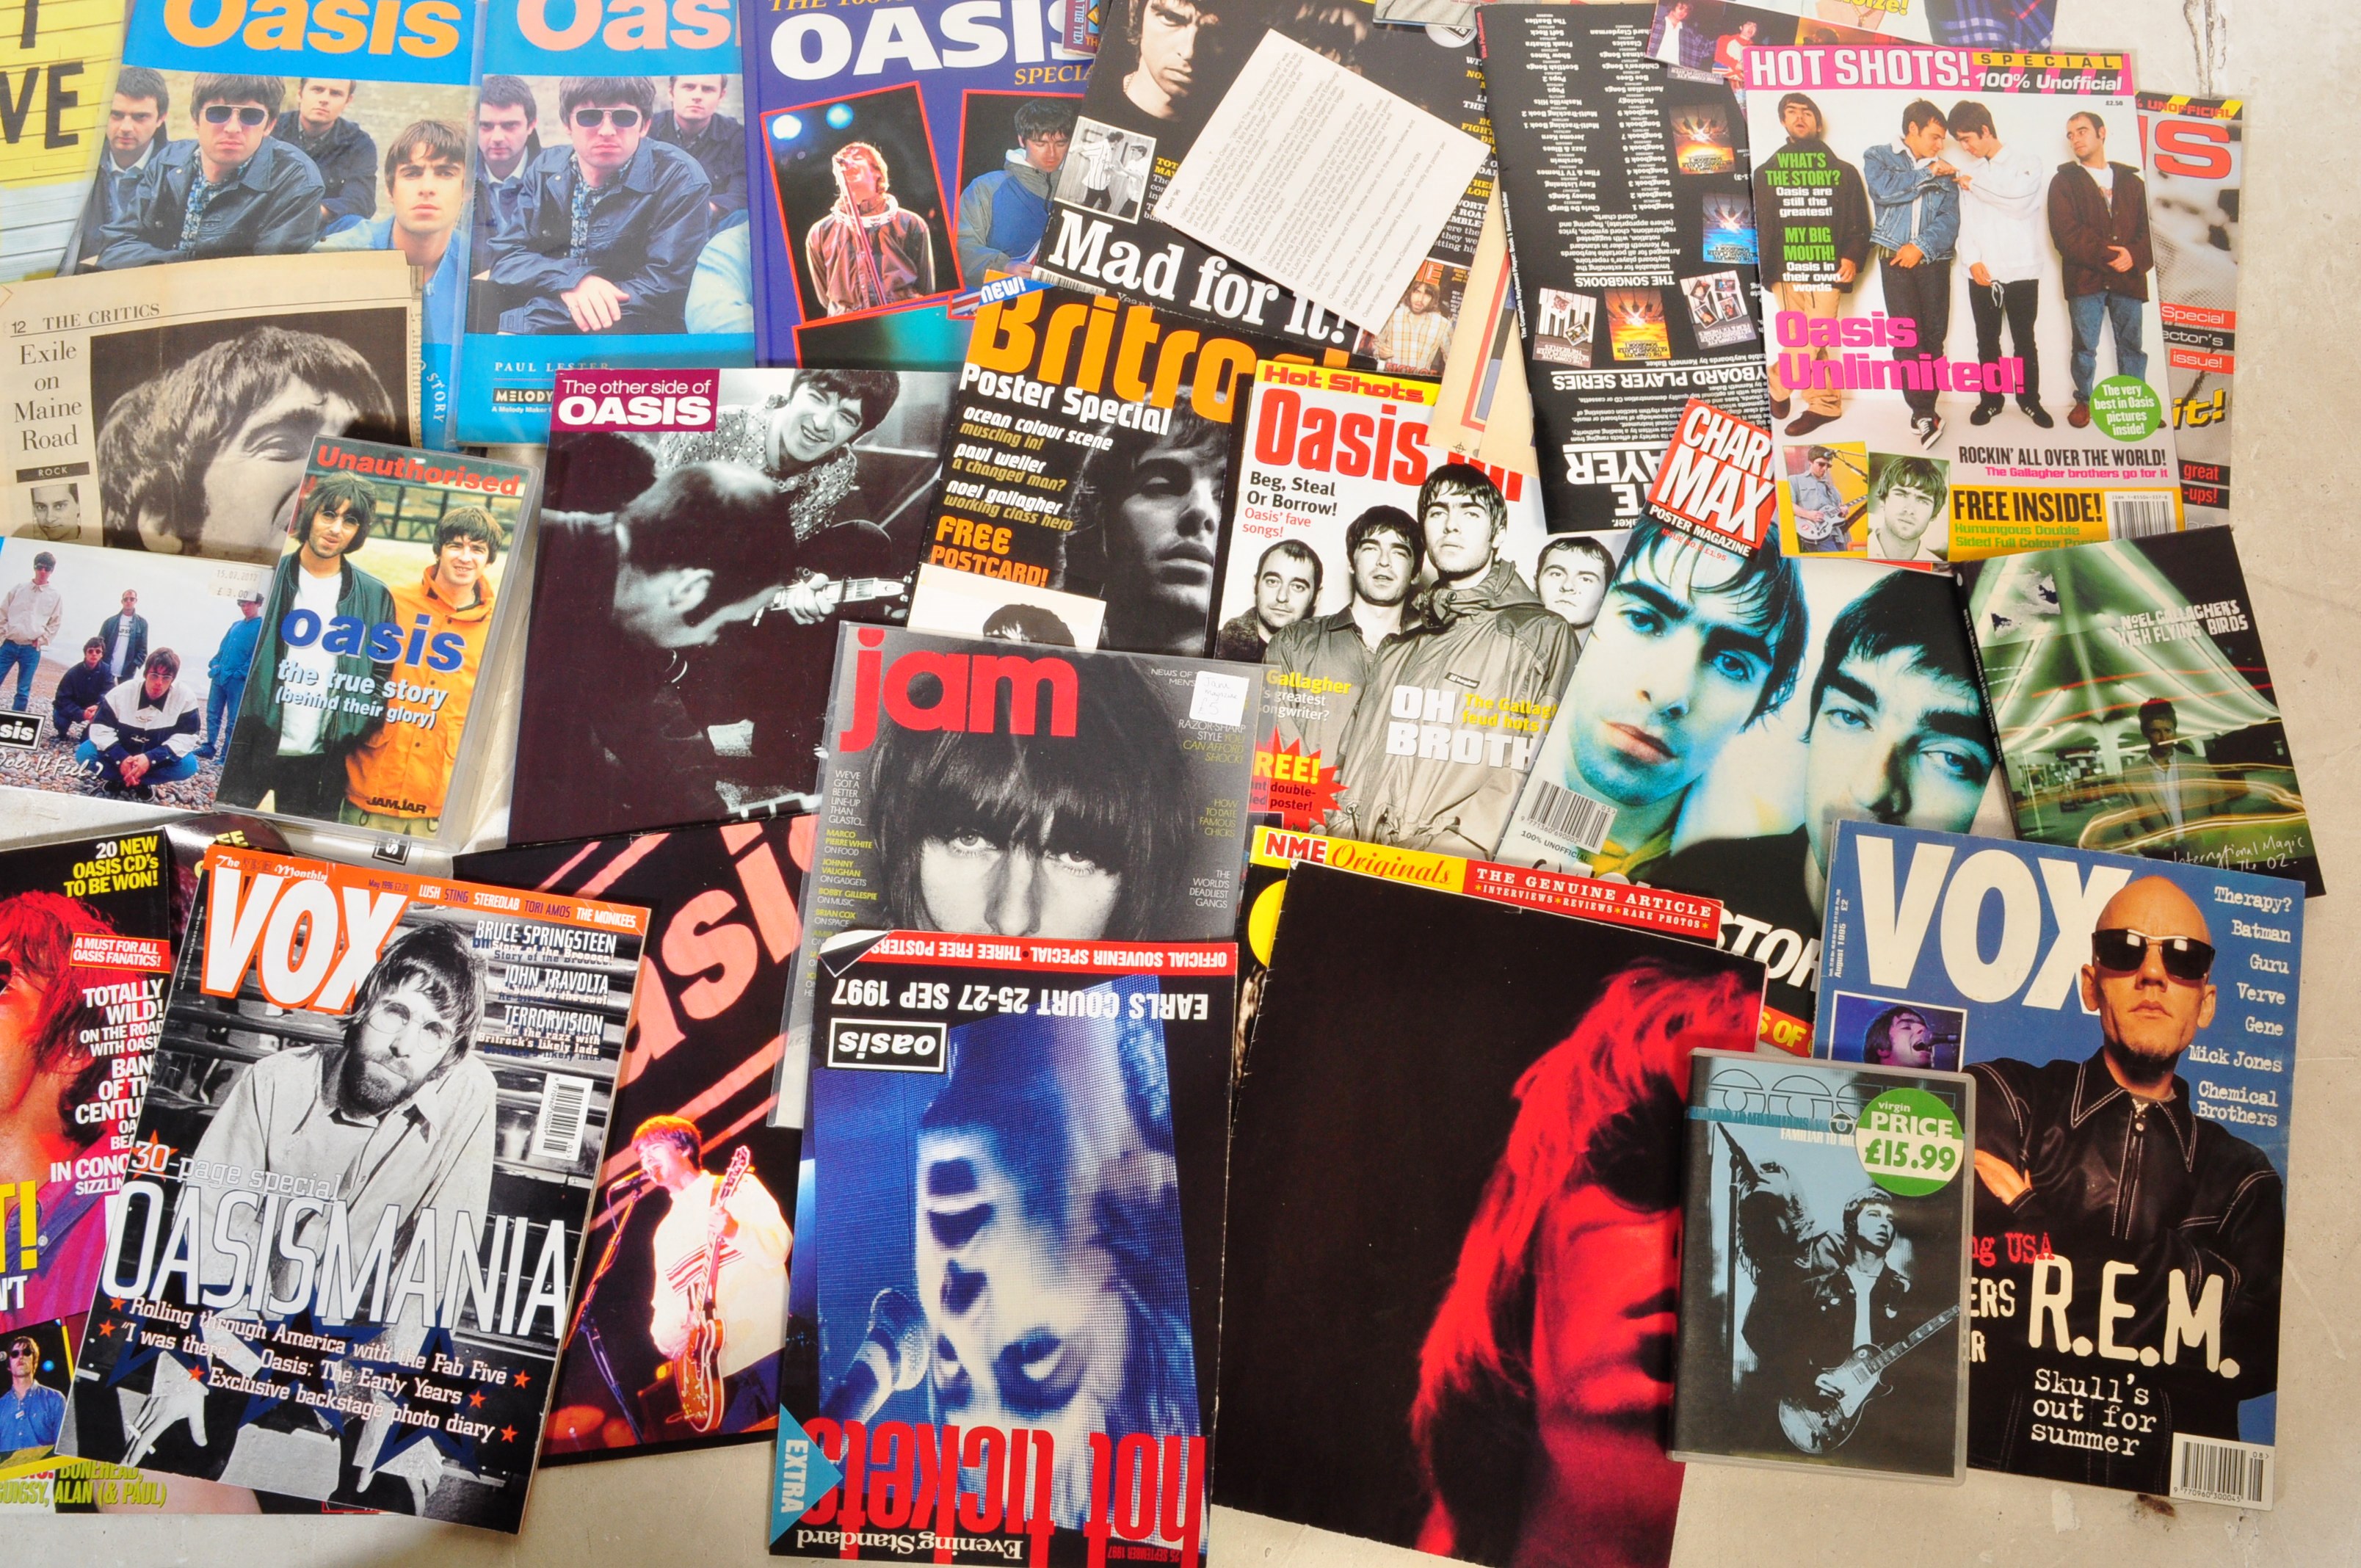 OASIS INTEREST - COLLECTION OF VINTAGE OASIS RELATED MEMORABILIA - Image 4 of 5